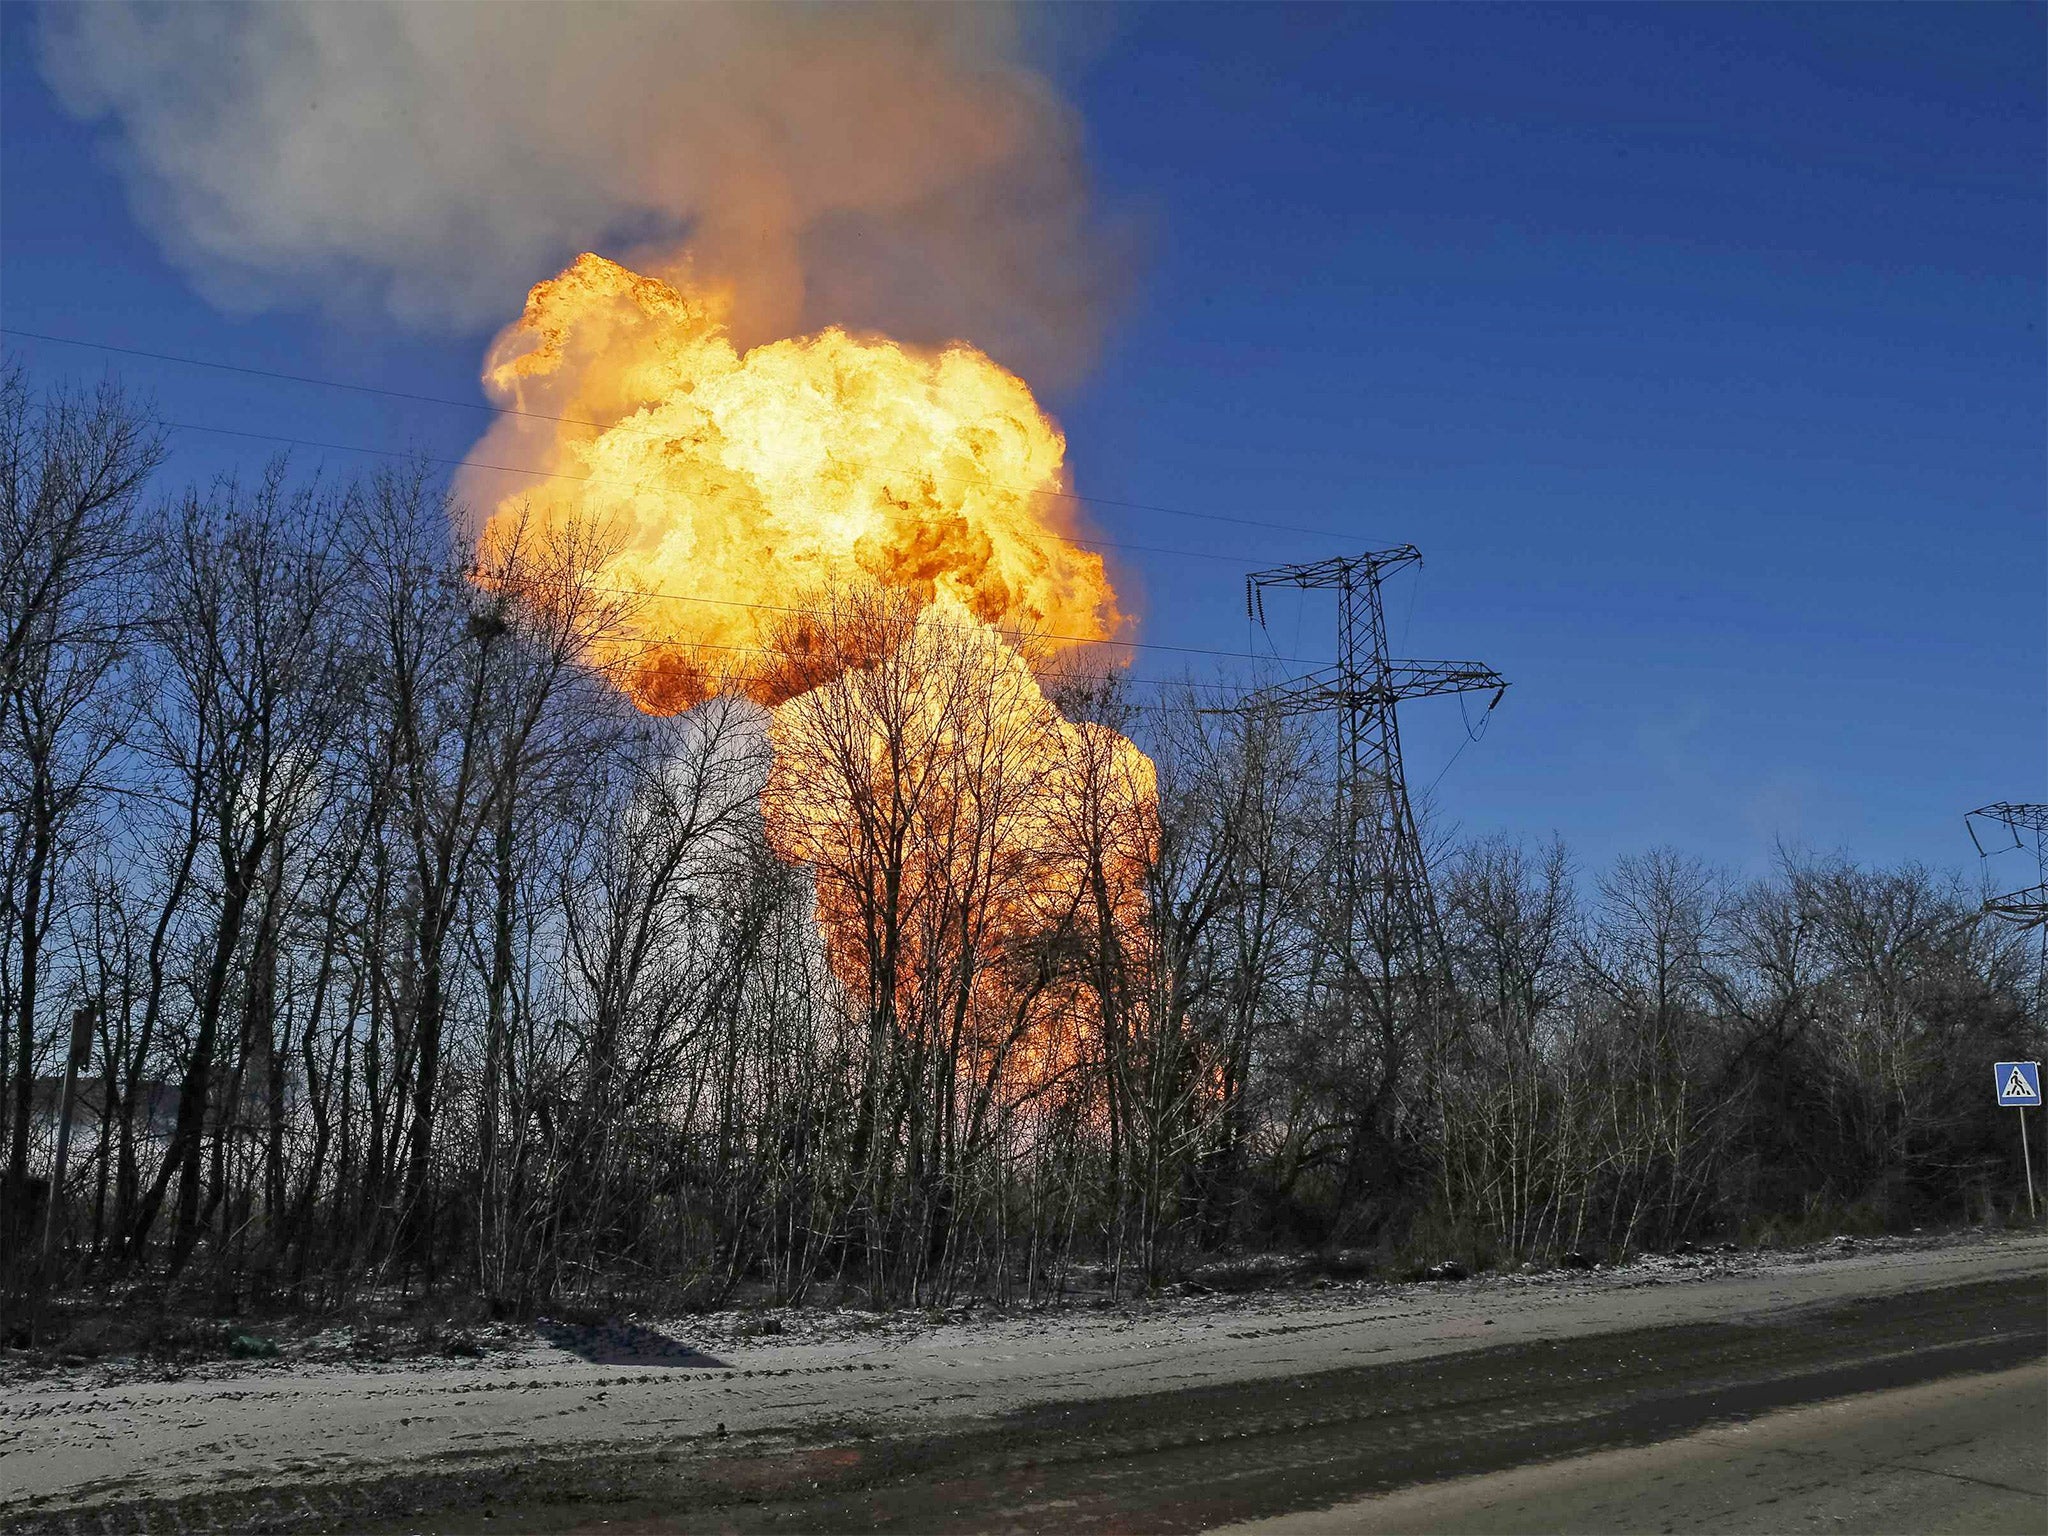 A gas pipe explosion caused by shelling near Debaltseve